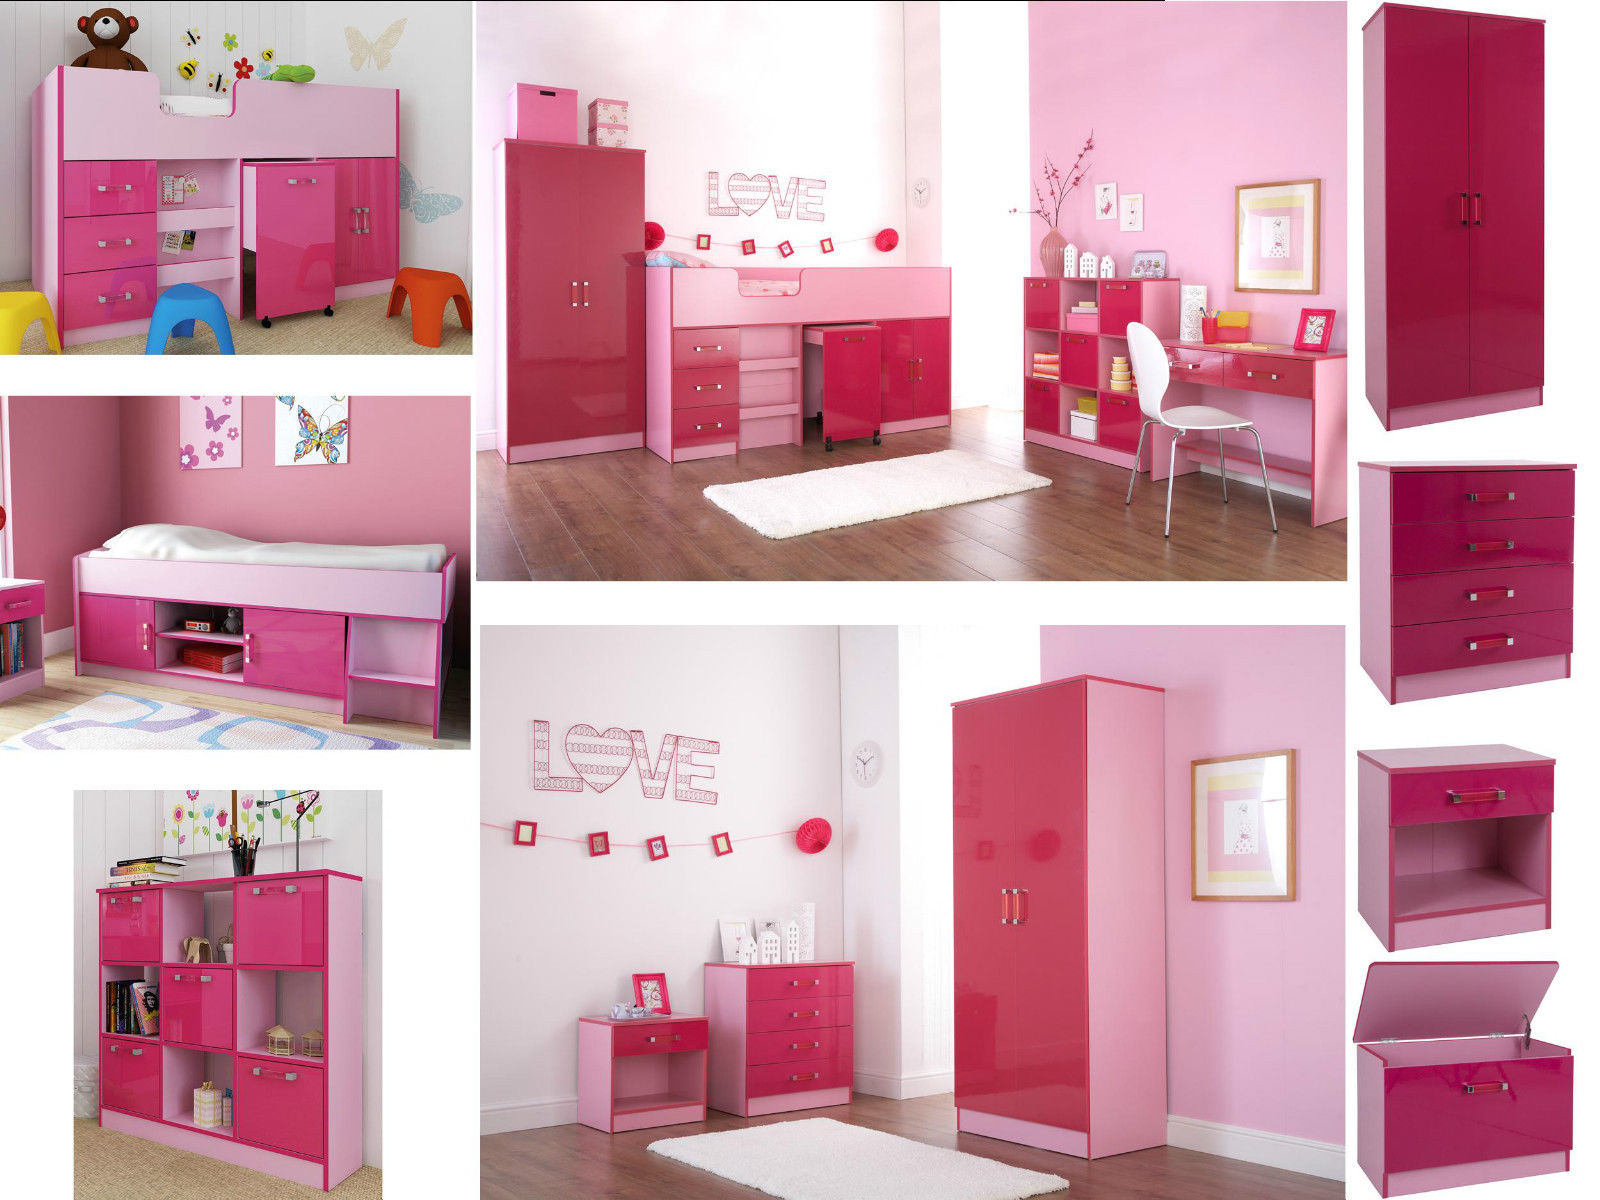 Details About Ottawa Caspian Pink Gloss Girls Bedroom Furniture Wardrobe Drawers Beds Sets with regard to dimensions 1600 X 1200